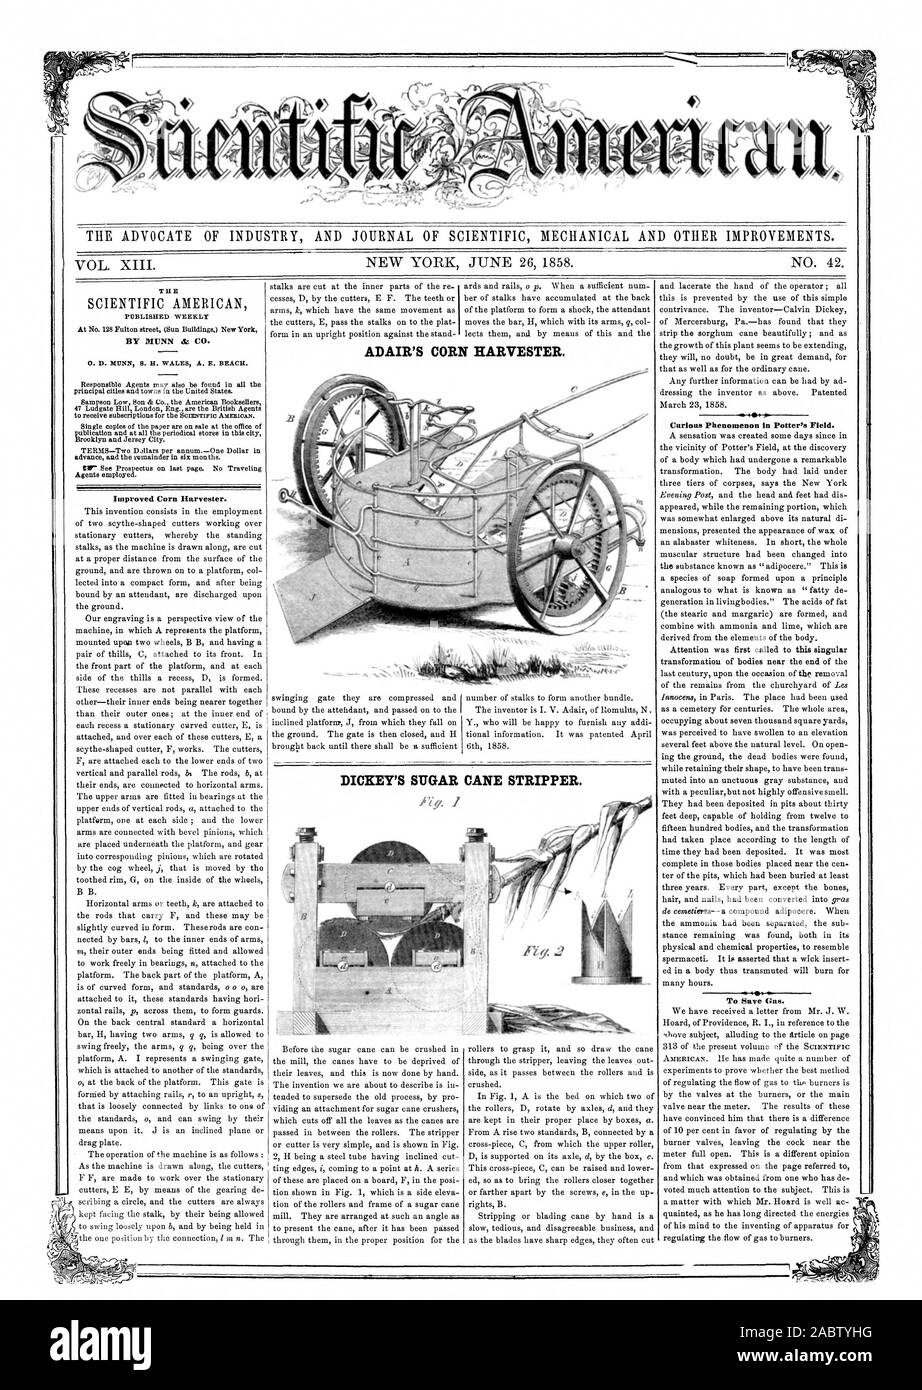 THE ADVOCATE OF INDUSTRY AND JOURNAL OF SCIENTIFIC MECHANICAL AND OTHER IMPROVEMENTS. BY MUNN dic CO. Improved Corn Harvester. Curious Phenomenon in Potter's Field. ADAIR'S CORN HARVESTER. DICKEY'S SUGAR CANE STRIPPER., scientific american, 1858-06-26 Stock Photo